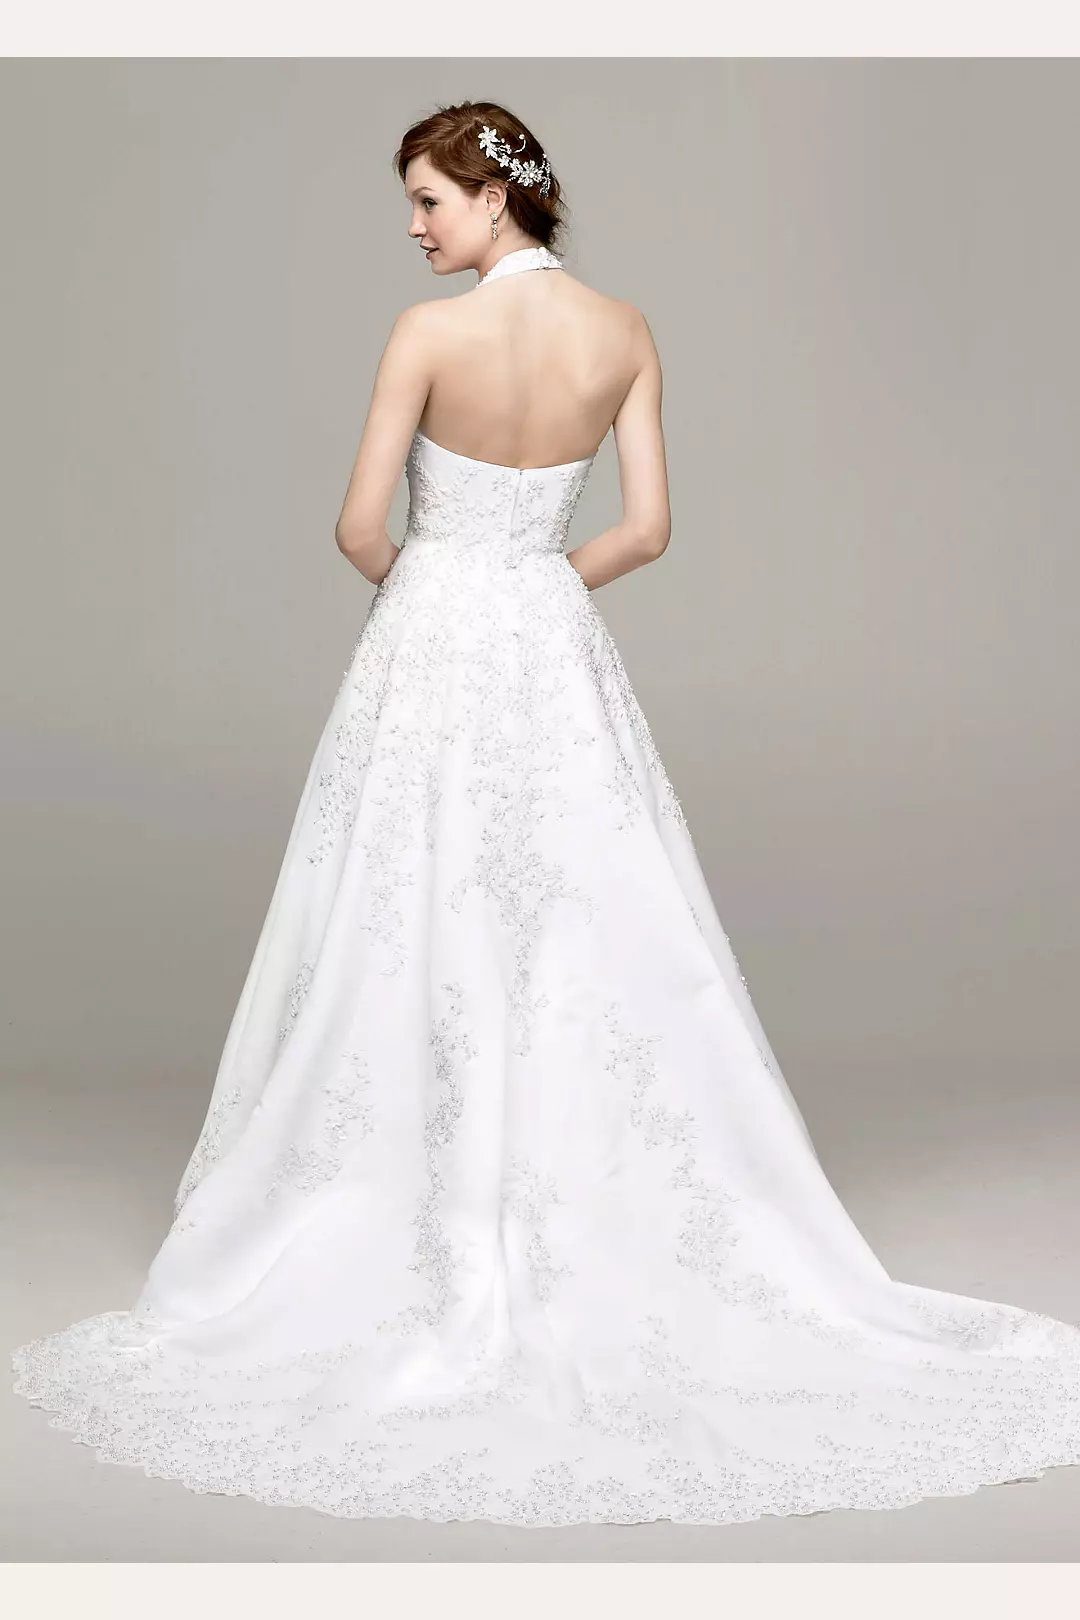 Satin Halter A-line Wedding Dress with Beaded Lace Image 2